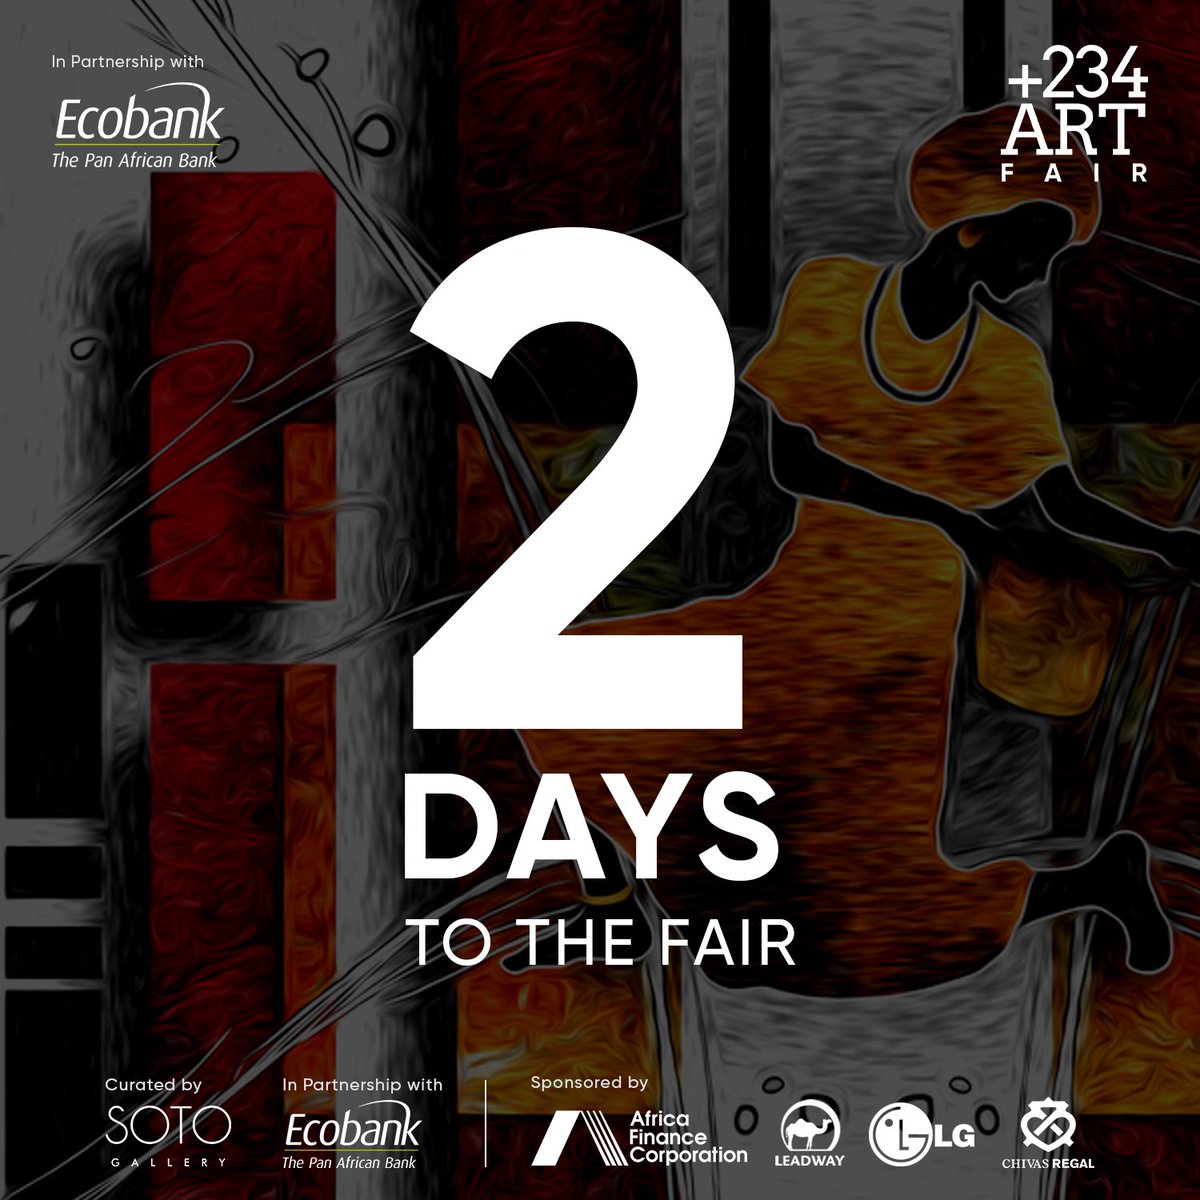 Just 2 days to the maiden edition of the +234 Art Fair, Lagos. Join us on an exhilarating journey into the world of art from a vibrant collective of budding and emerging talents - each one representing the pinnacle of their craft and taking us on a journey with their art. This…